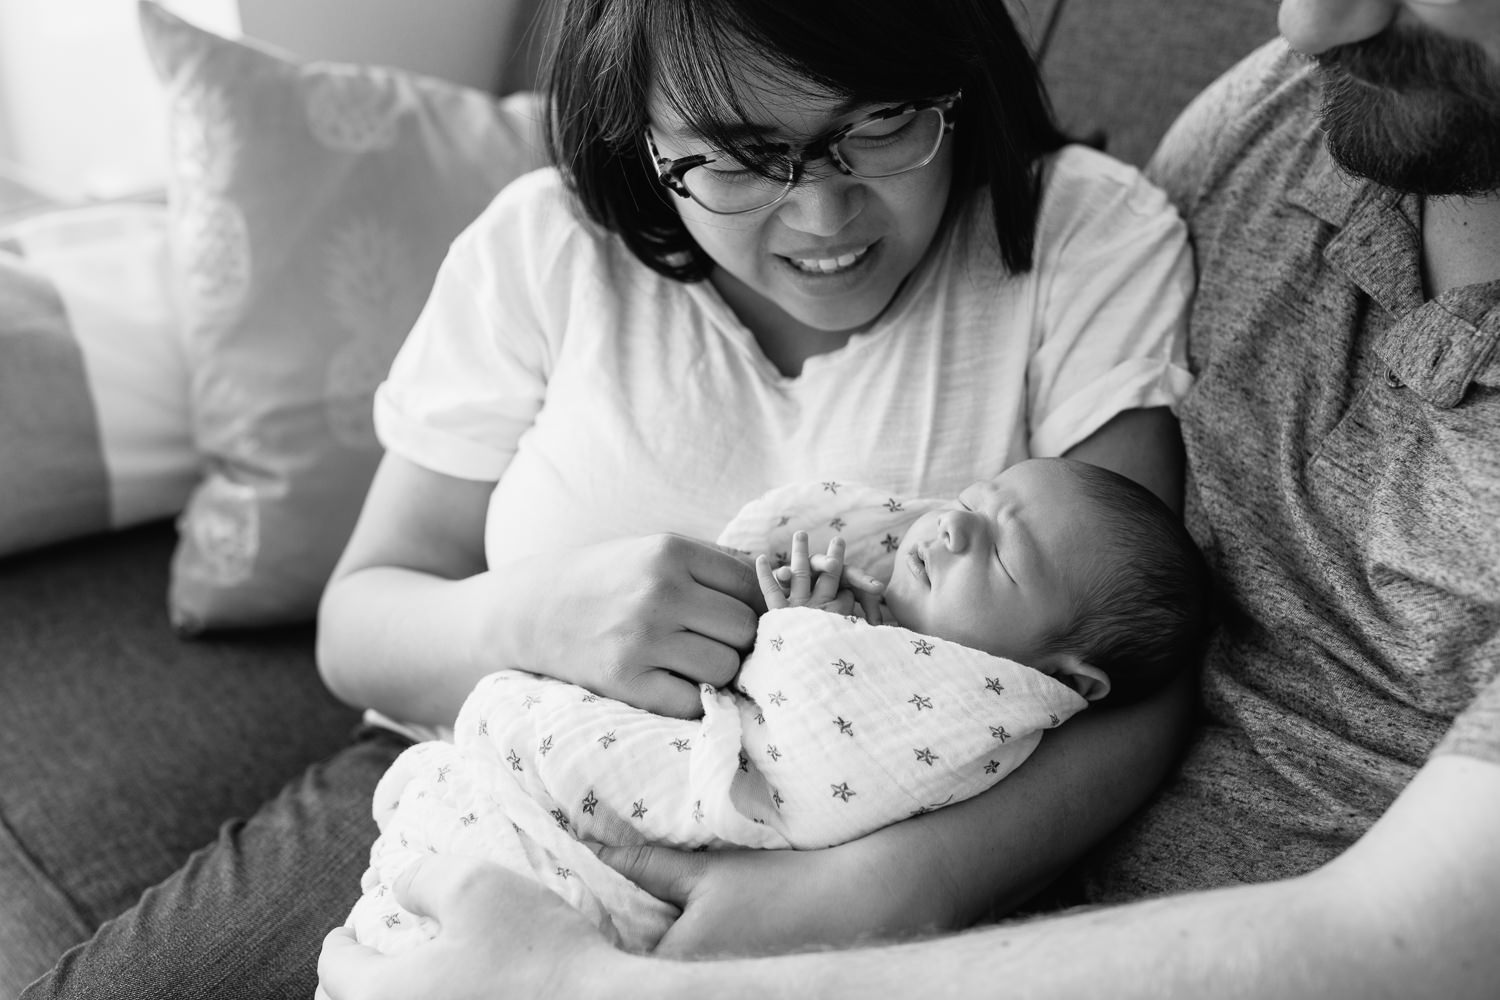 family of 3 sitting on couch, new mom holding sleeping, swaddled 2 week old baby boy, dad next to them with arm around wife and hand on son, parents smiling - York Region Lifestyle Photography